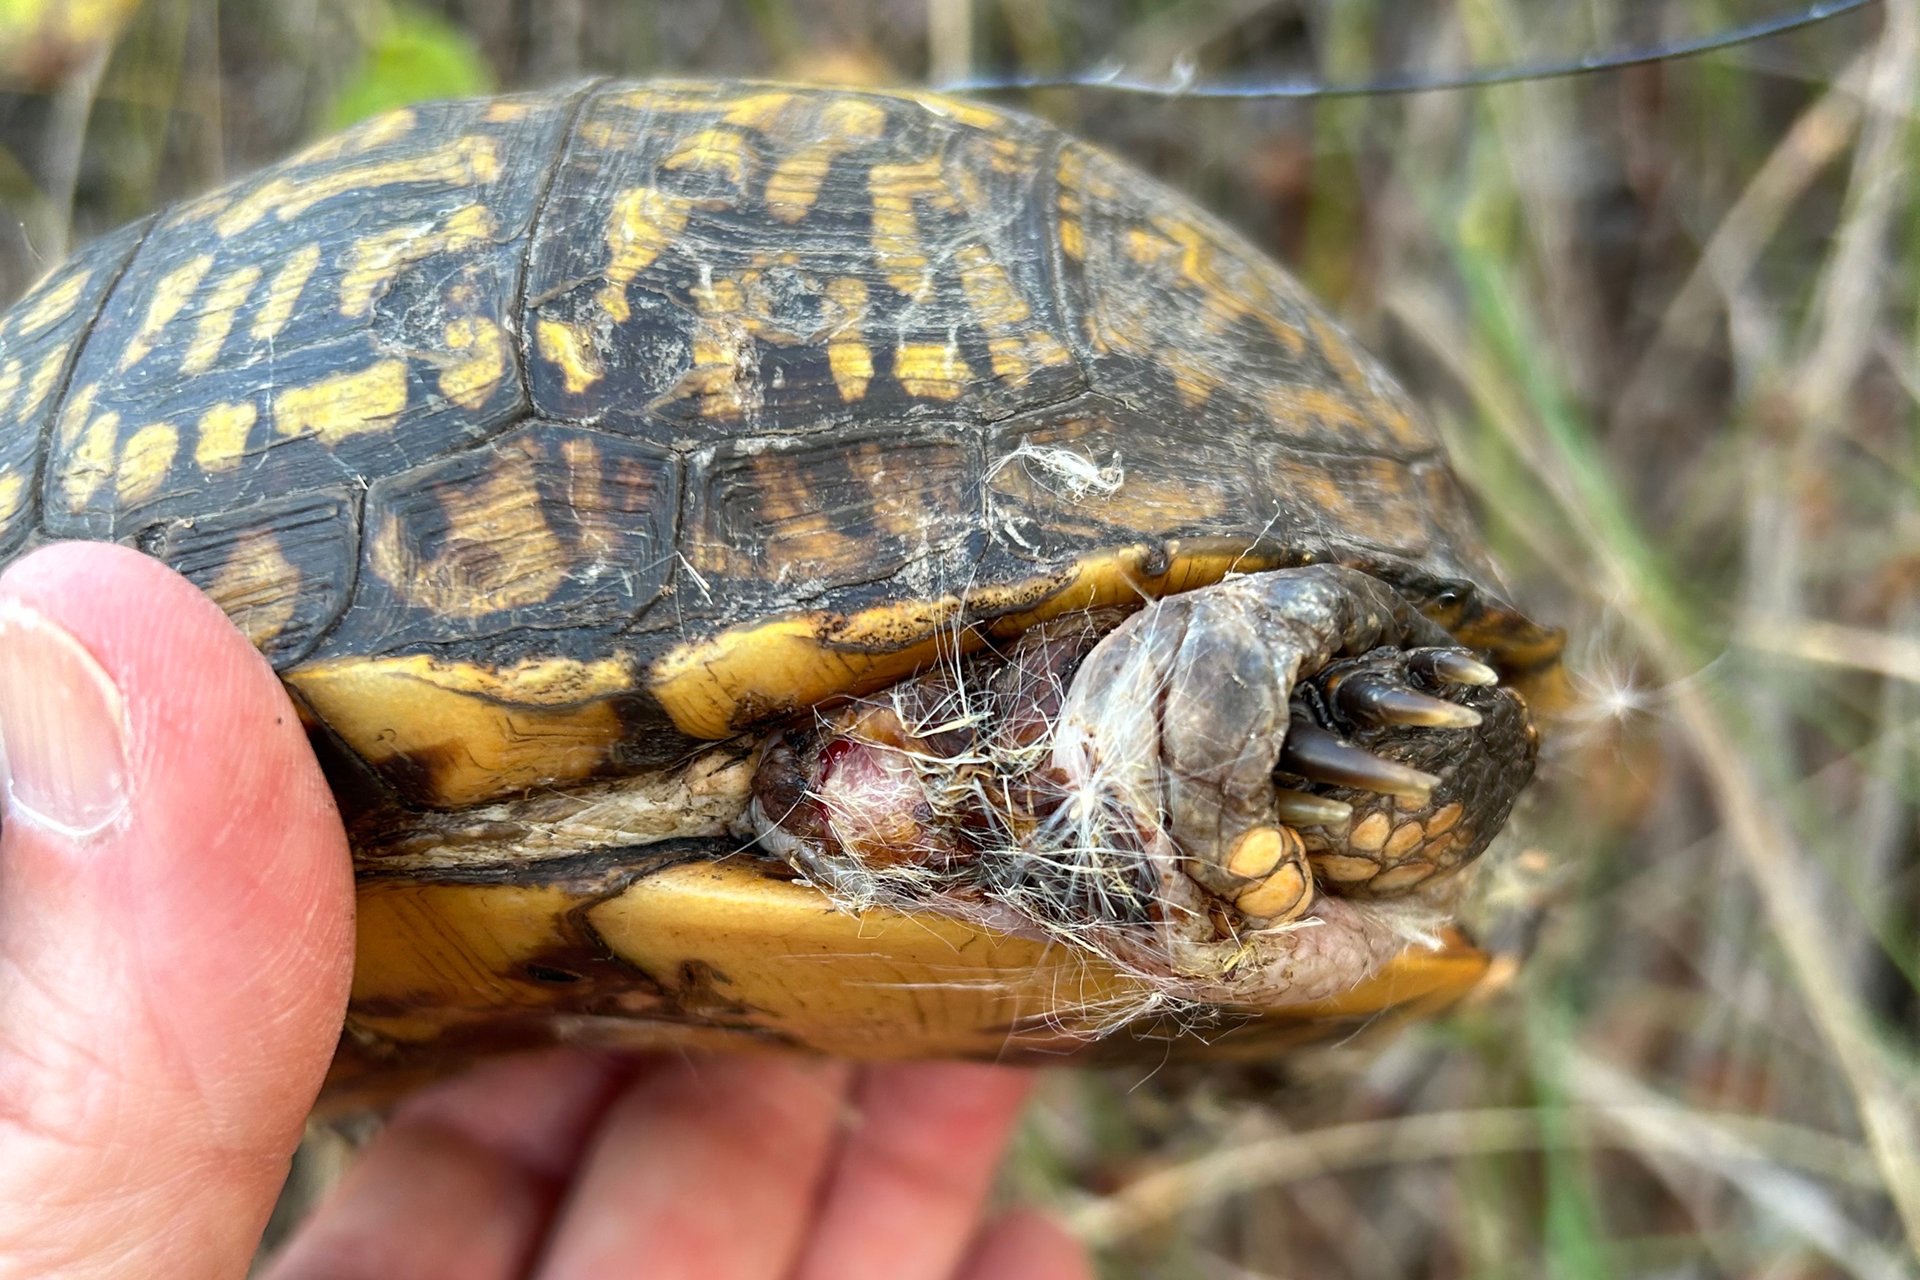 Box Turtle 63, unable to retract into her shell